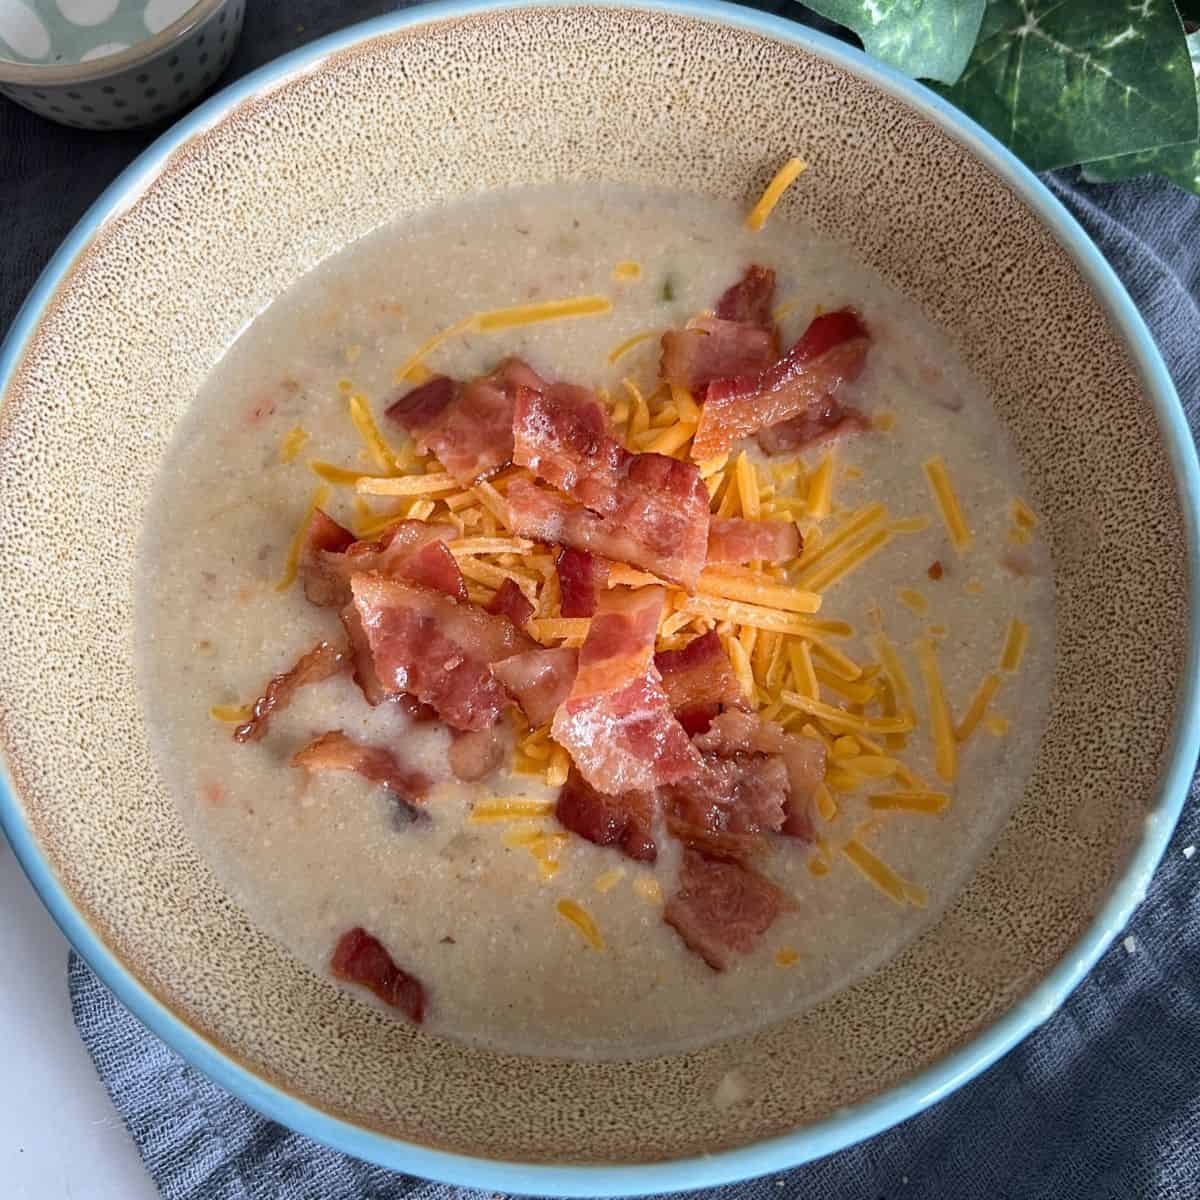 This potato soup recipe from Ree Drummond is loaded with potatoes, onions, carrots, and celery that gets blended up into a creamy rich soup.